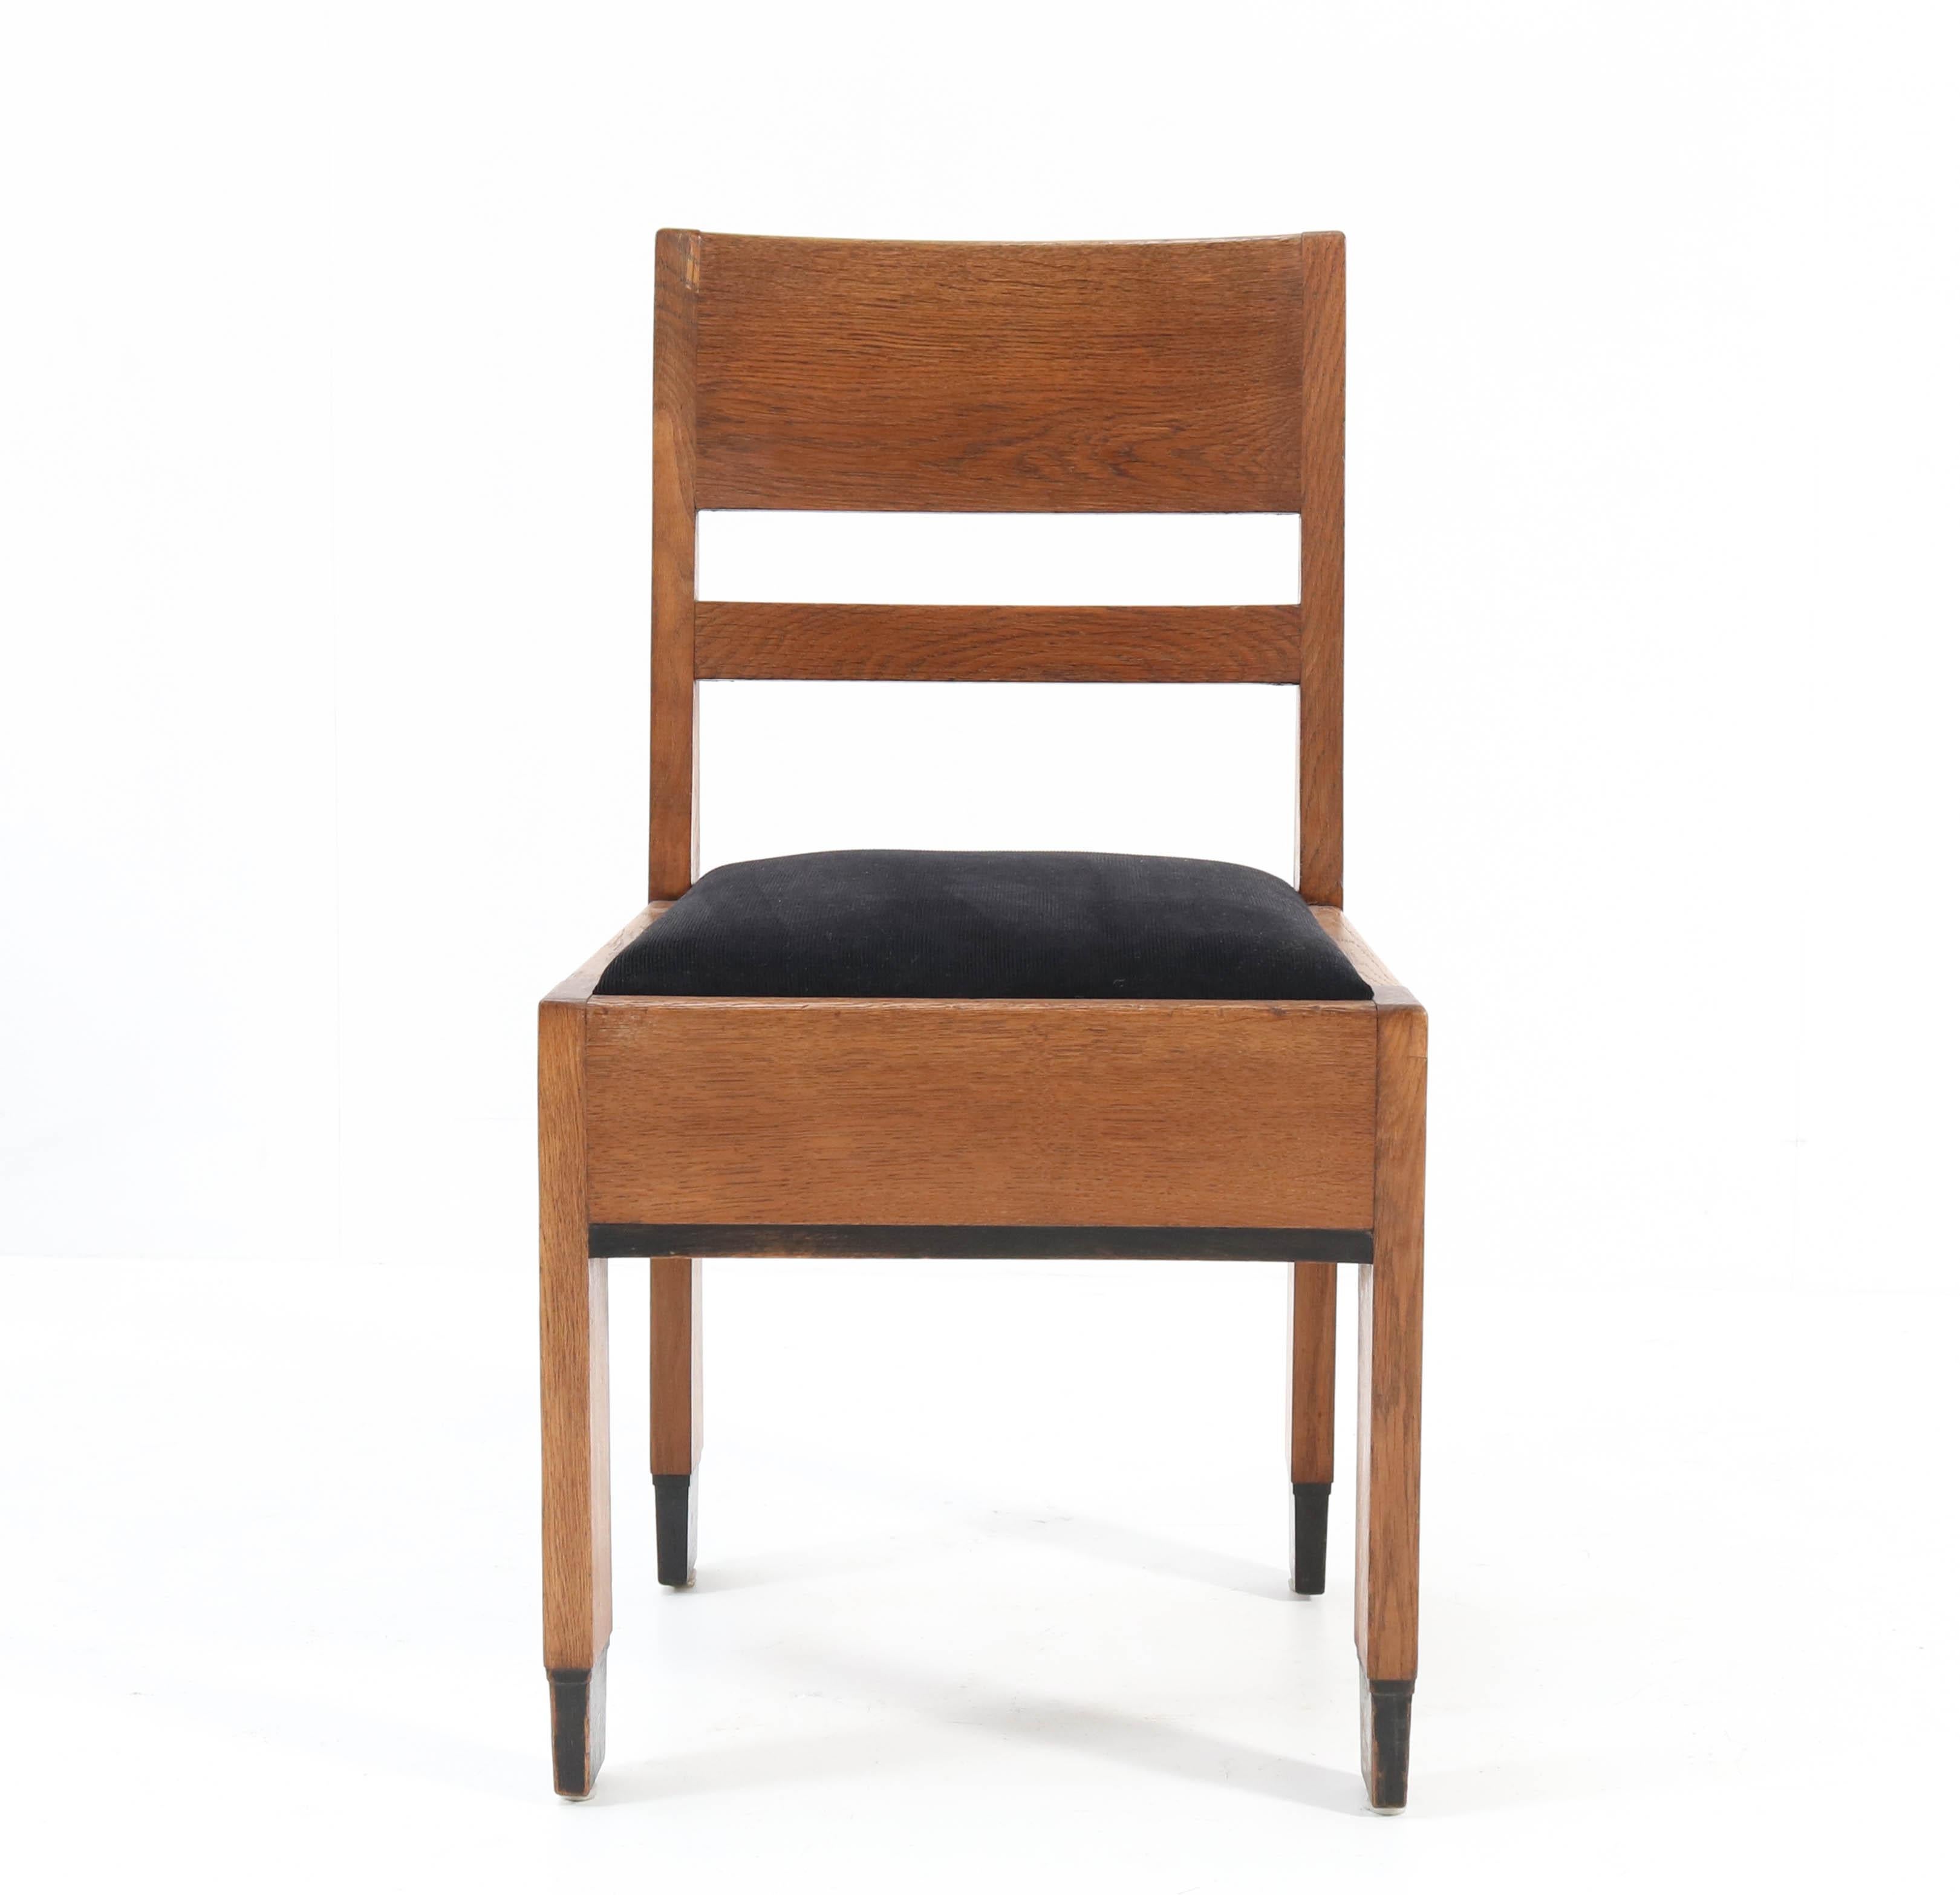 Eight Oak Art Deco Haagse School Chairs by H. Fels for L.O.V. Oosterbeek, 1924 6